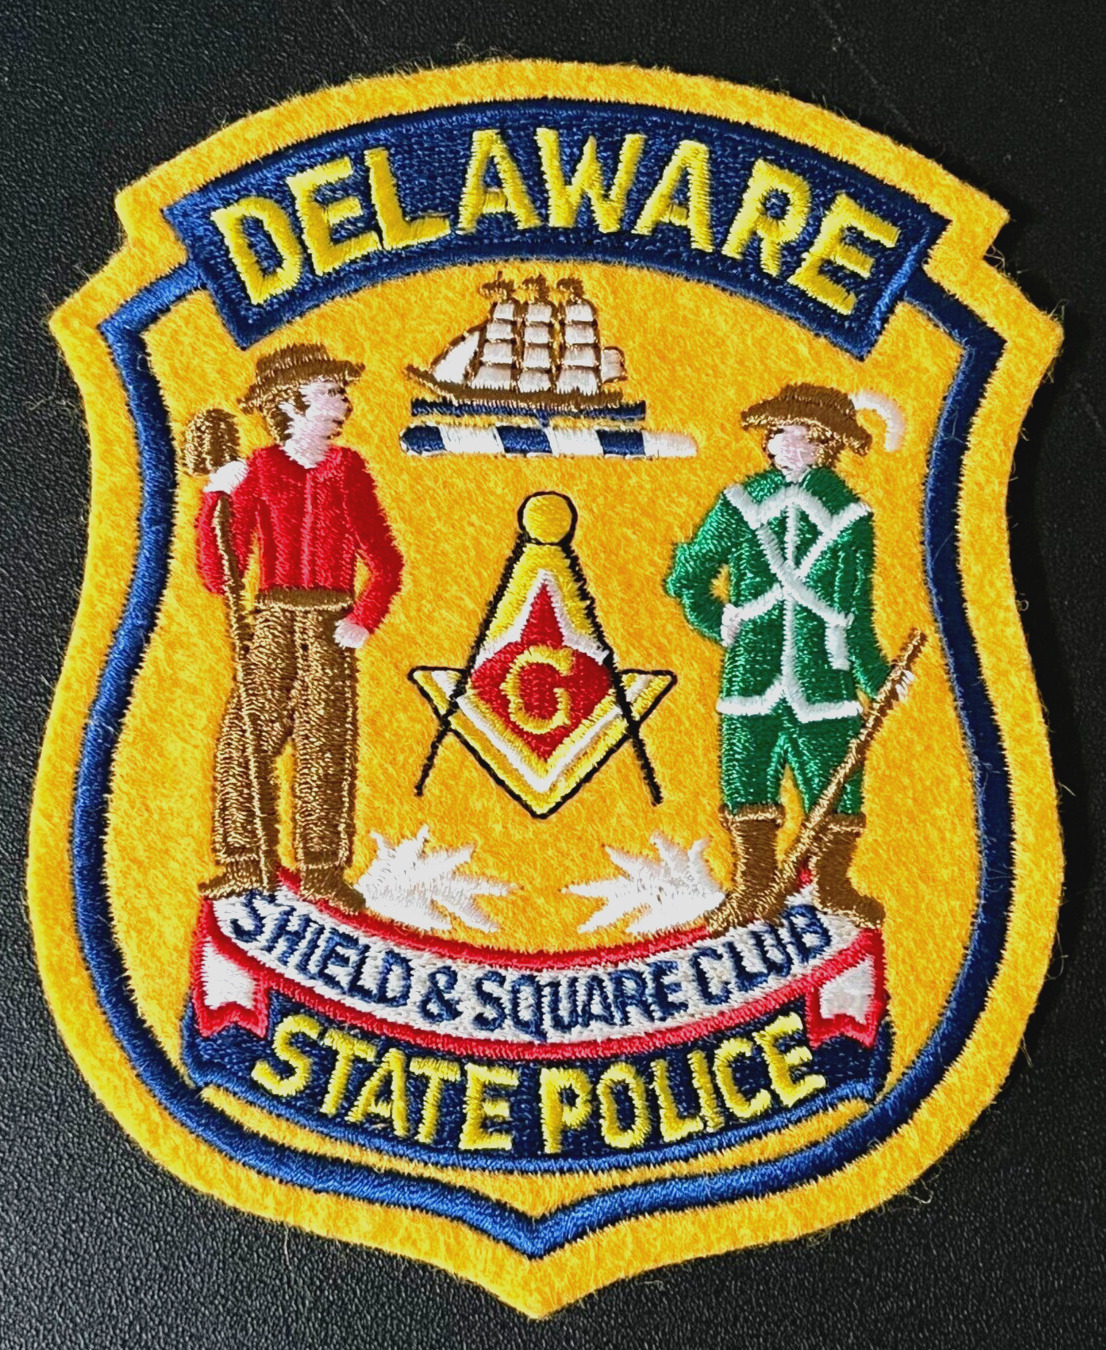 DELAWARE STATE POLICE MASONIC PATCH (SPC9) FULL COLOR SHOULDER INSIGNIA